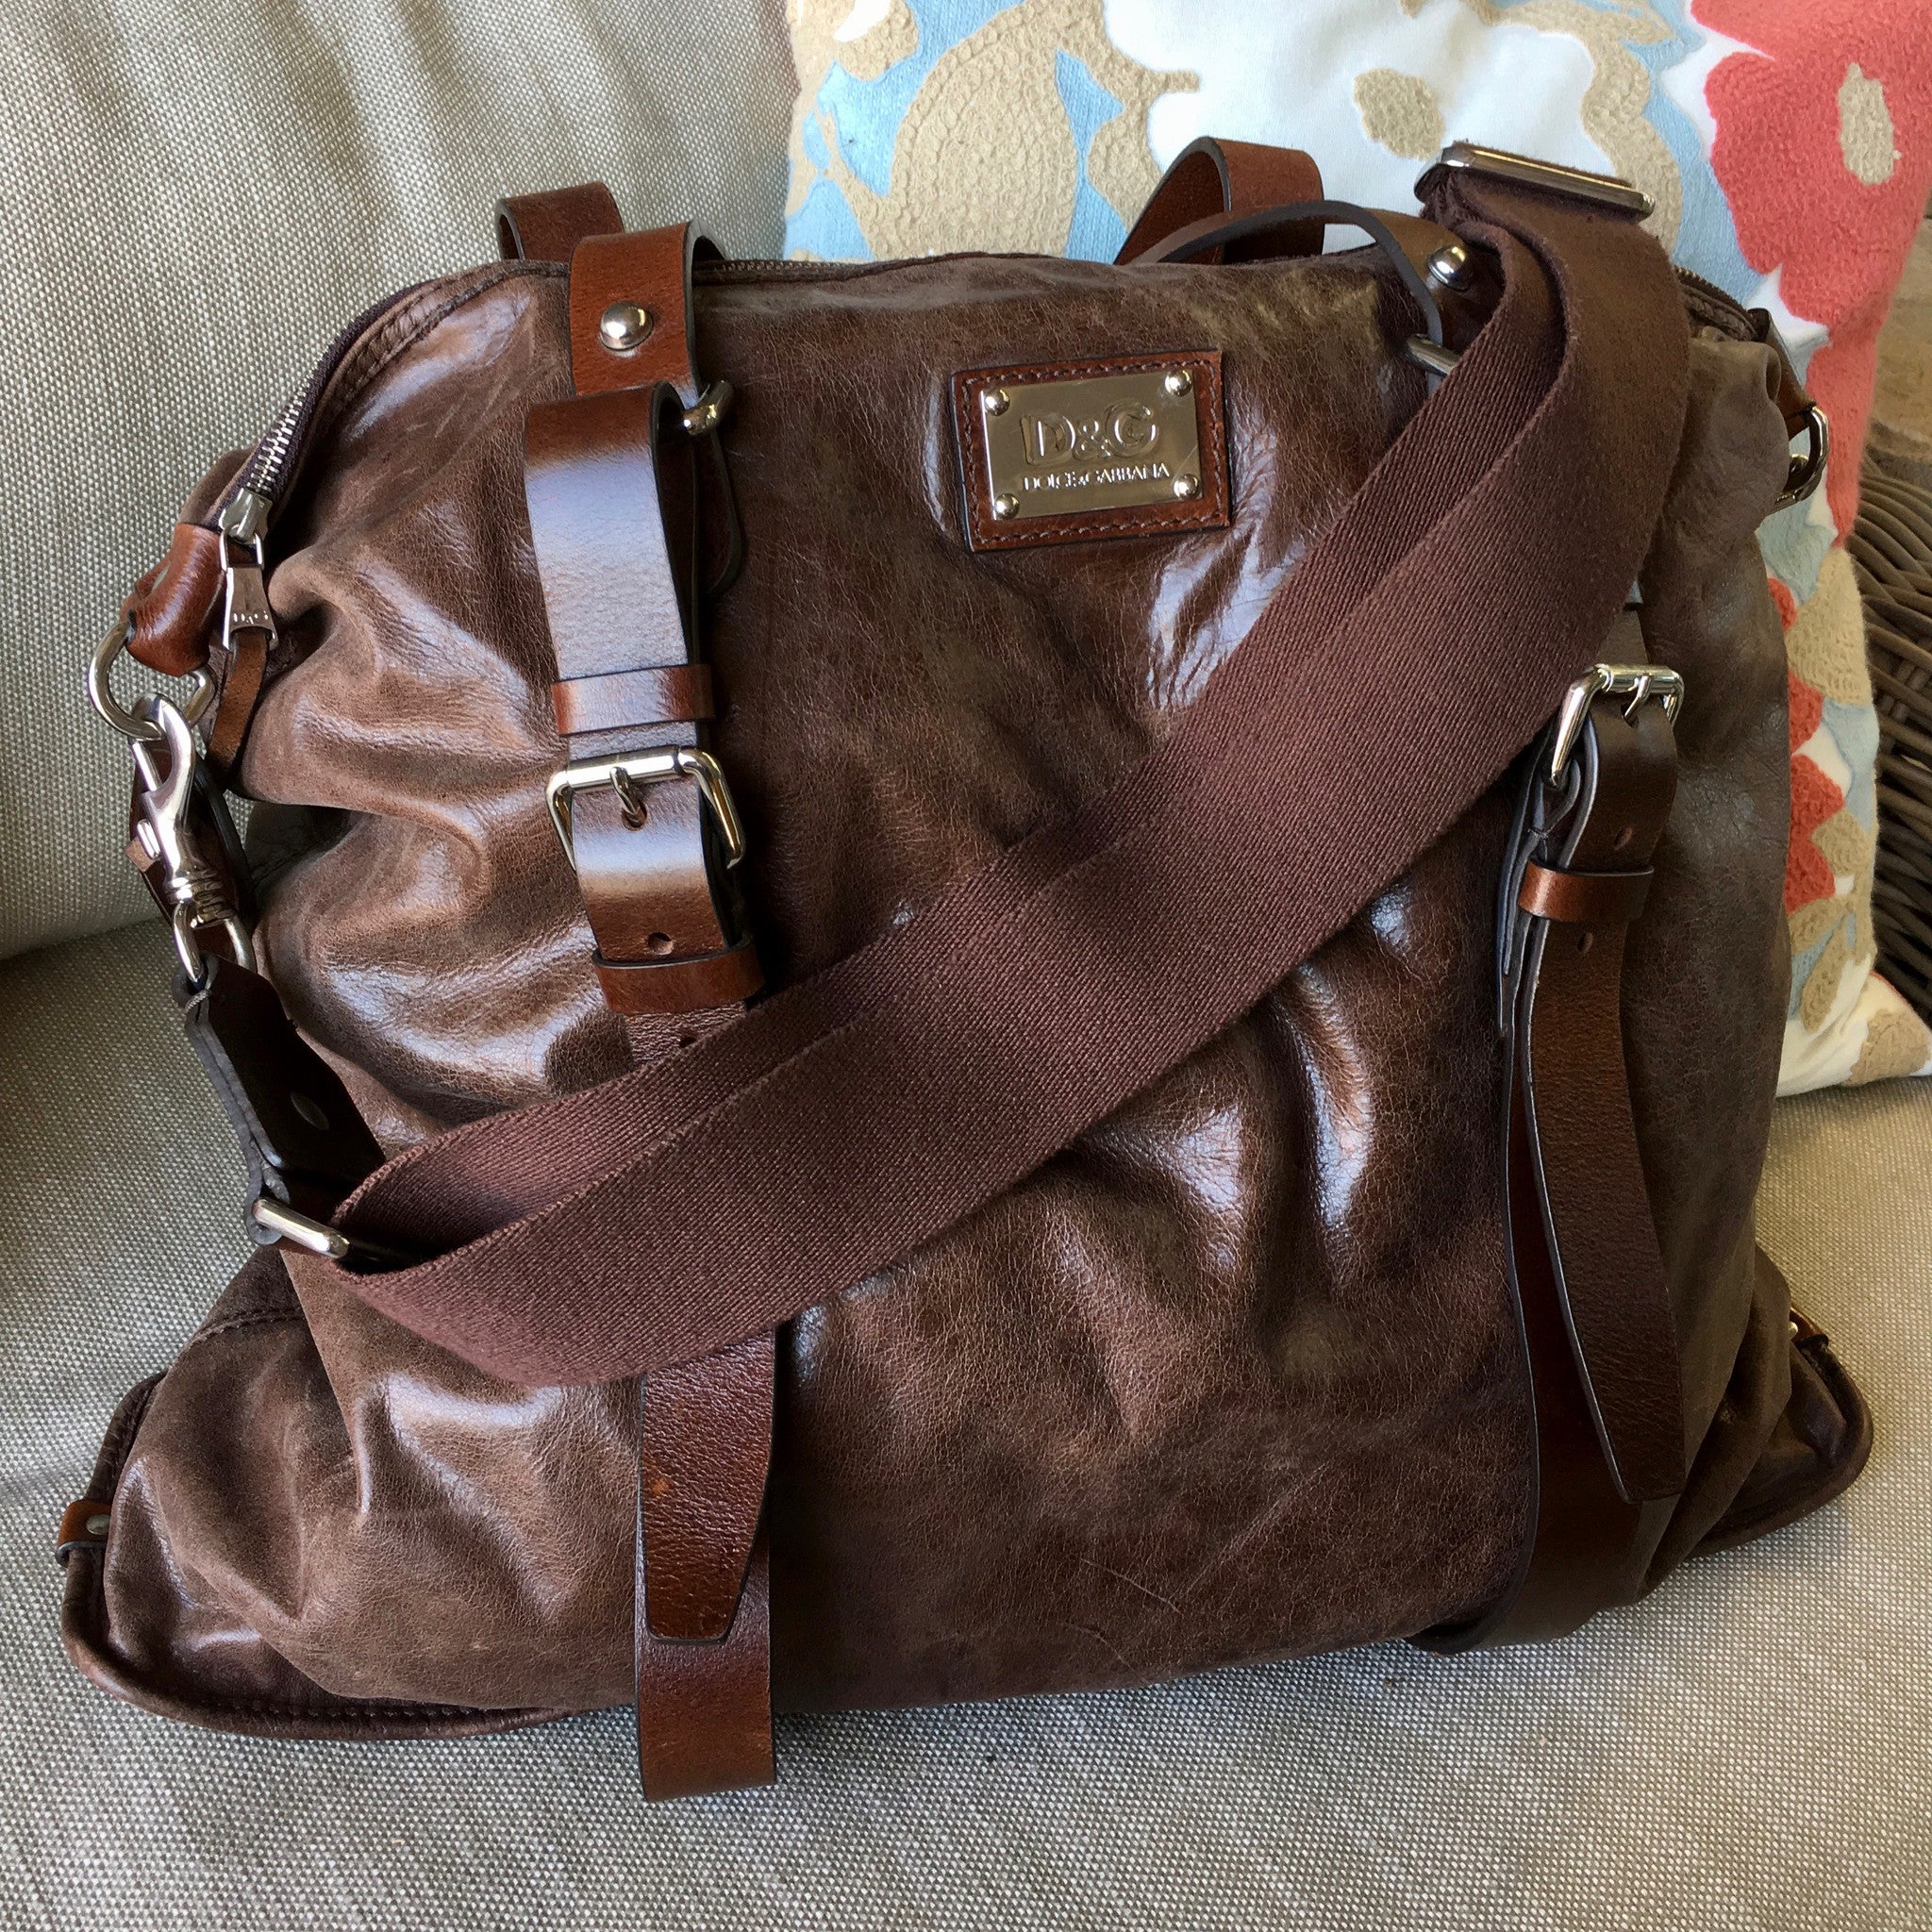 Dolce & Gabbana Brown Leather Travel Overnight Shoulder Bag | Hashtag Watch  Co.